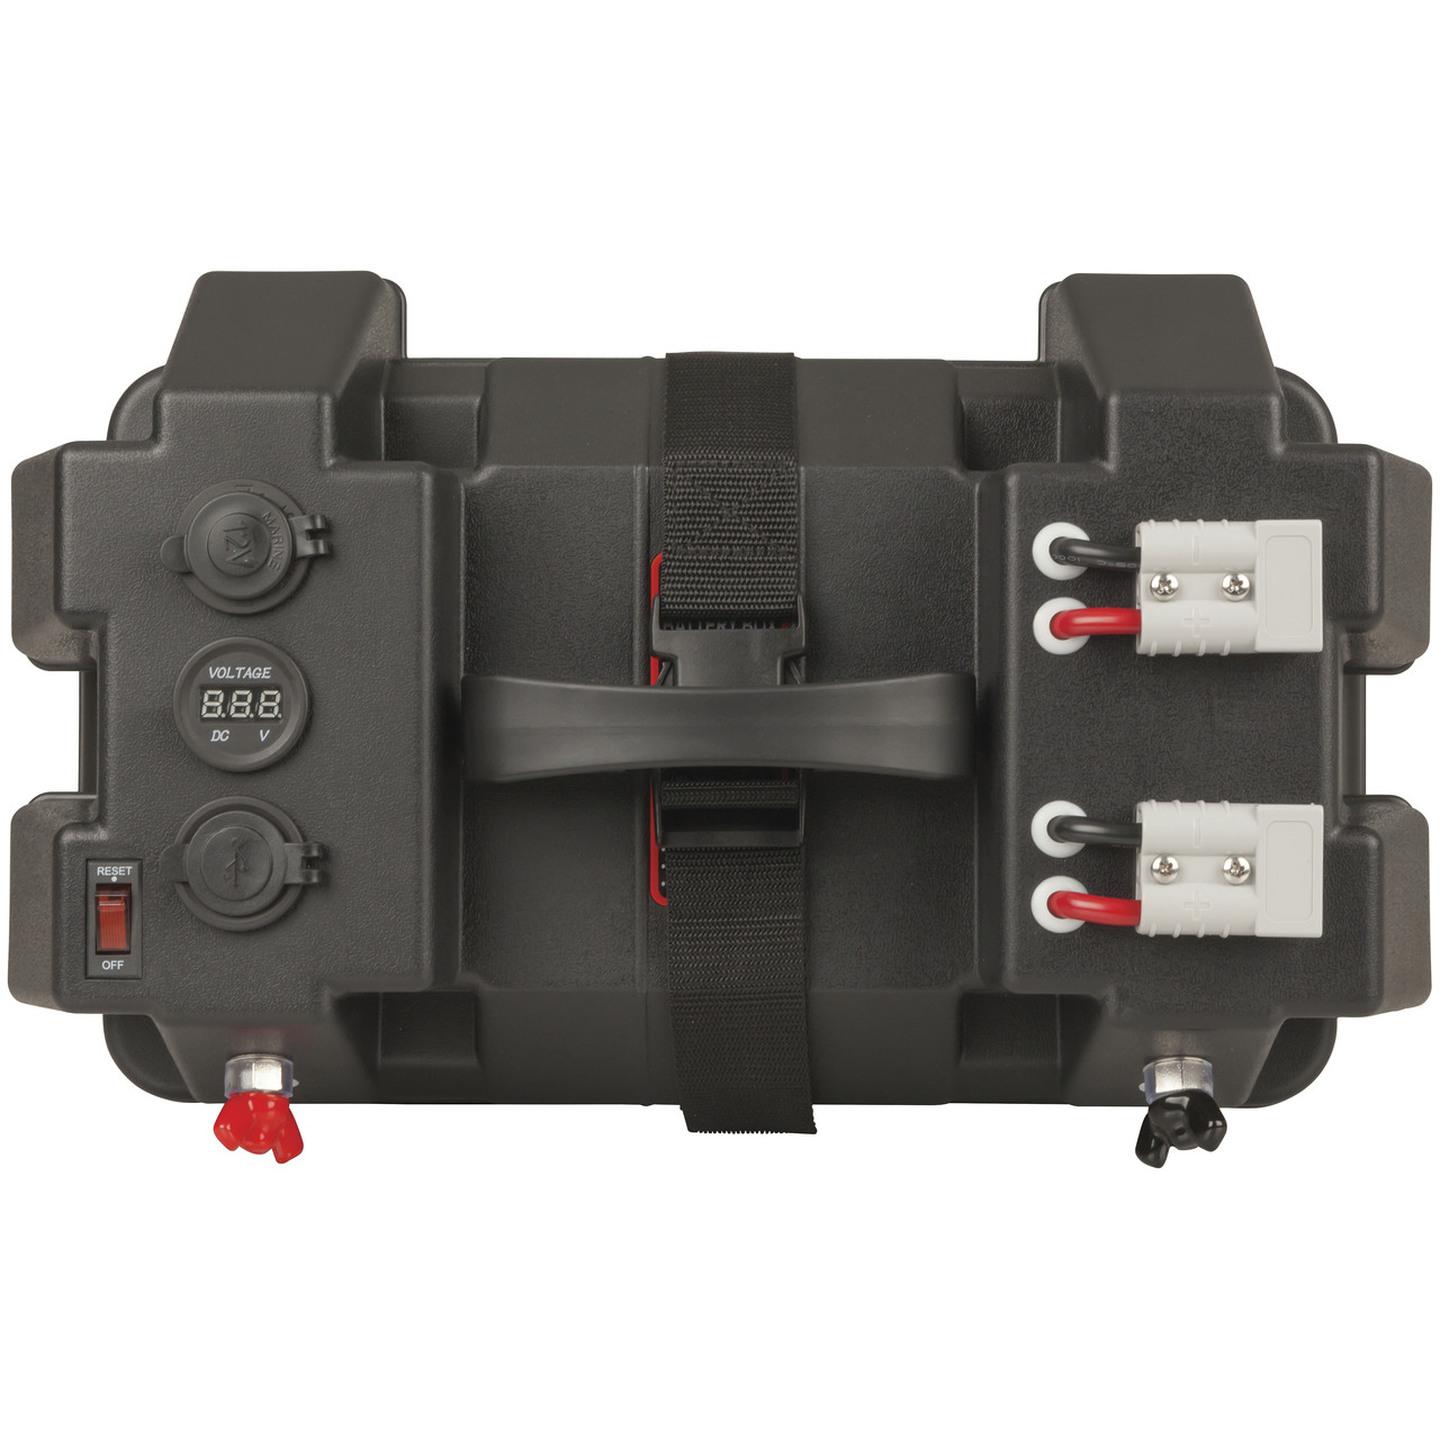 Powertech Battery Box with Power Accessories